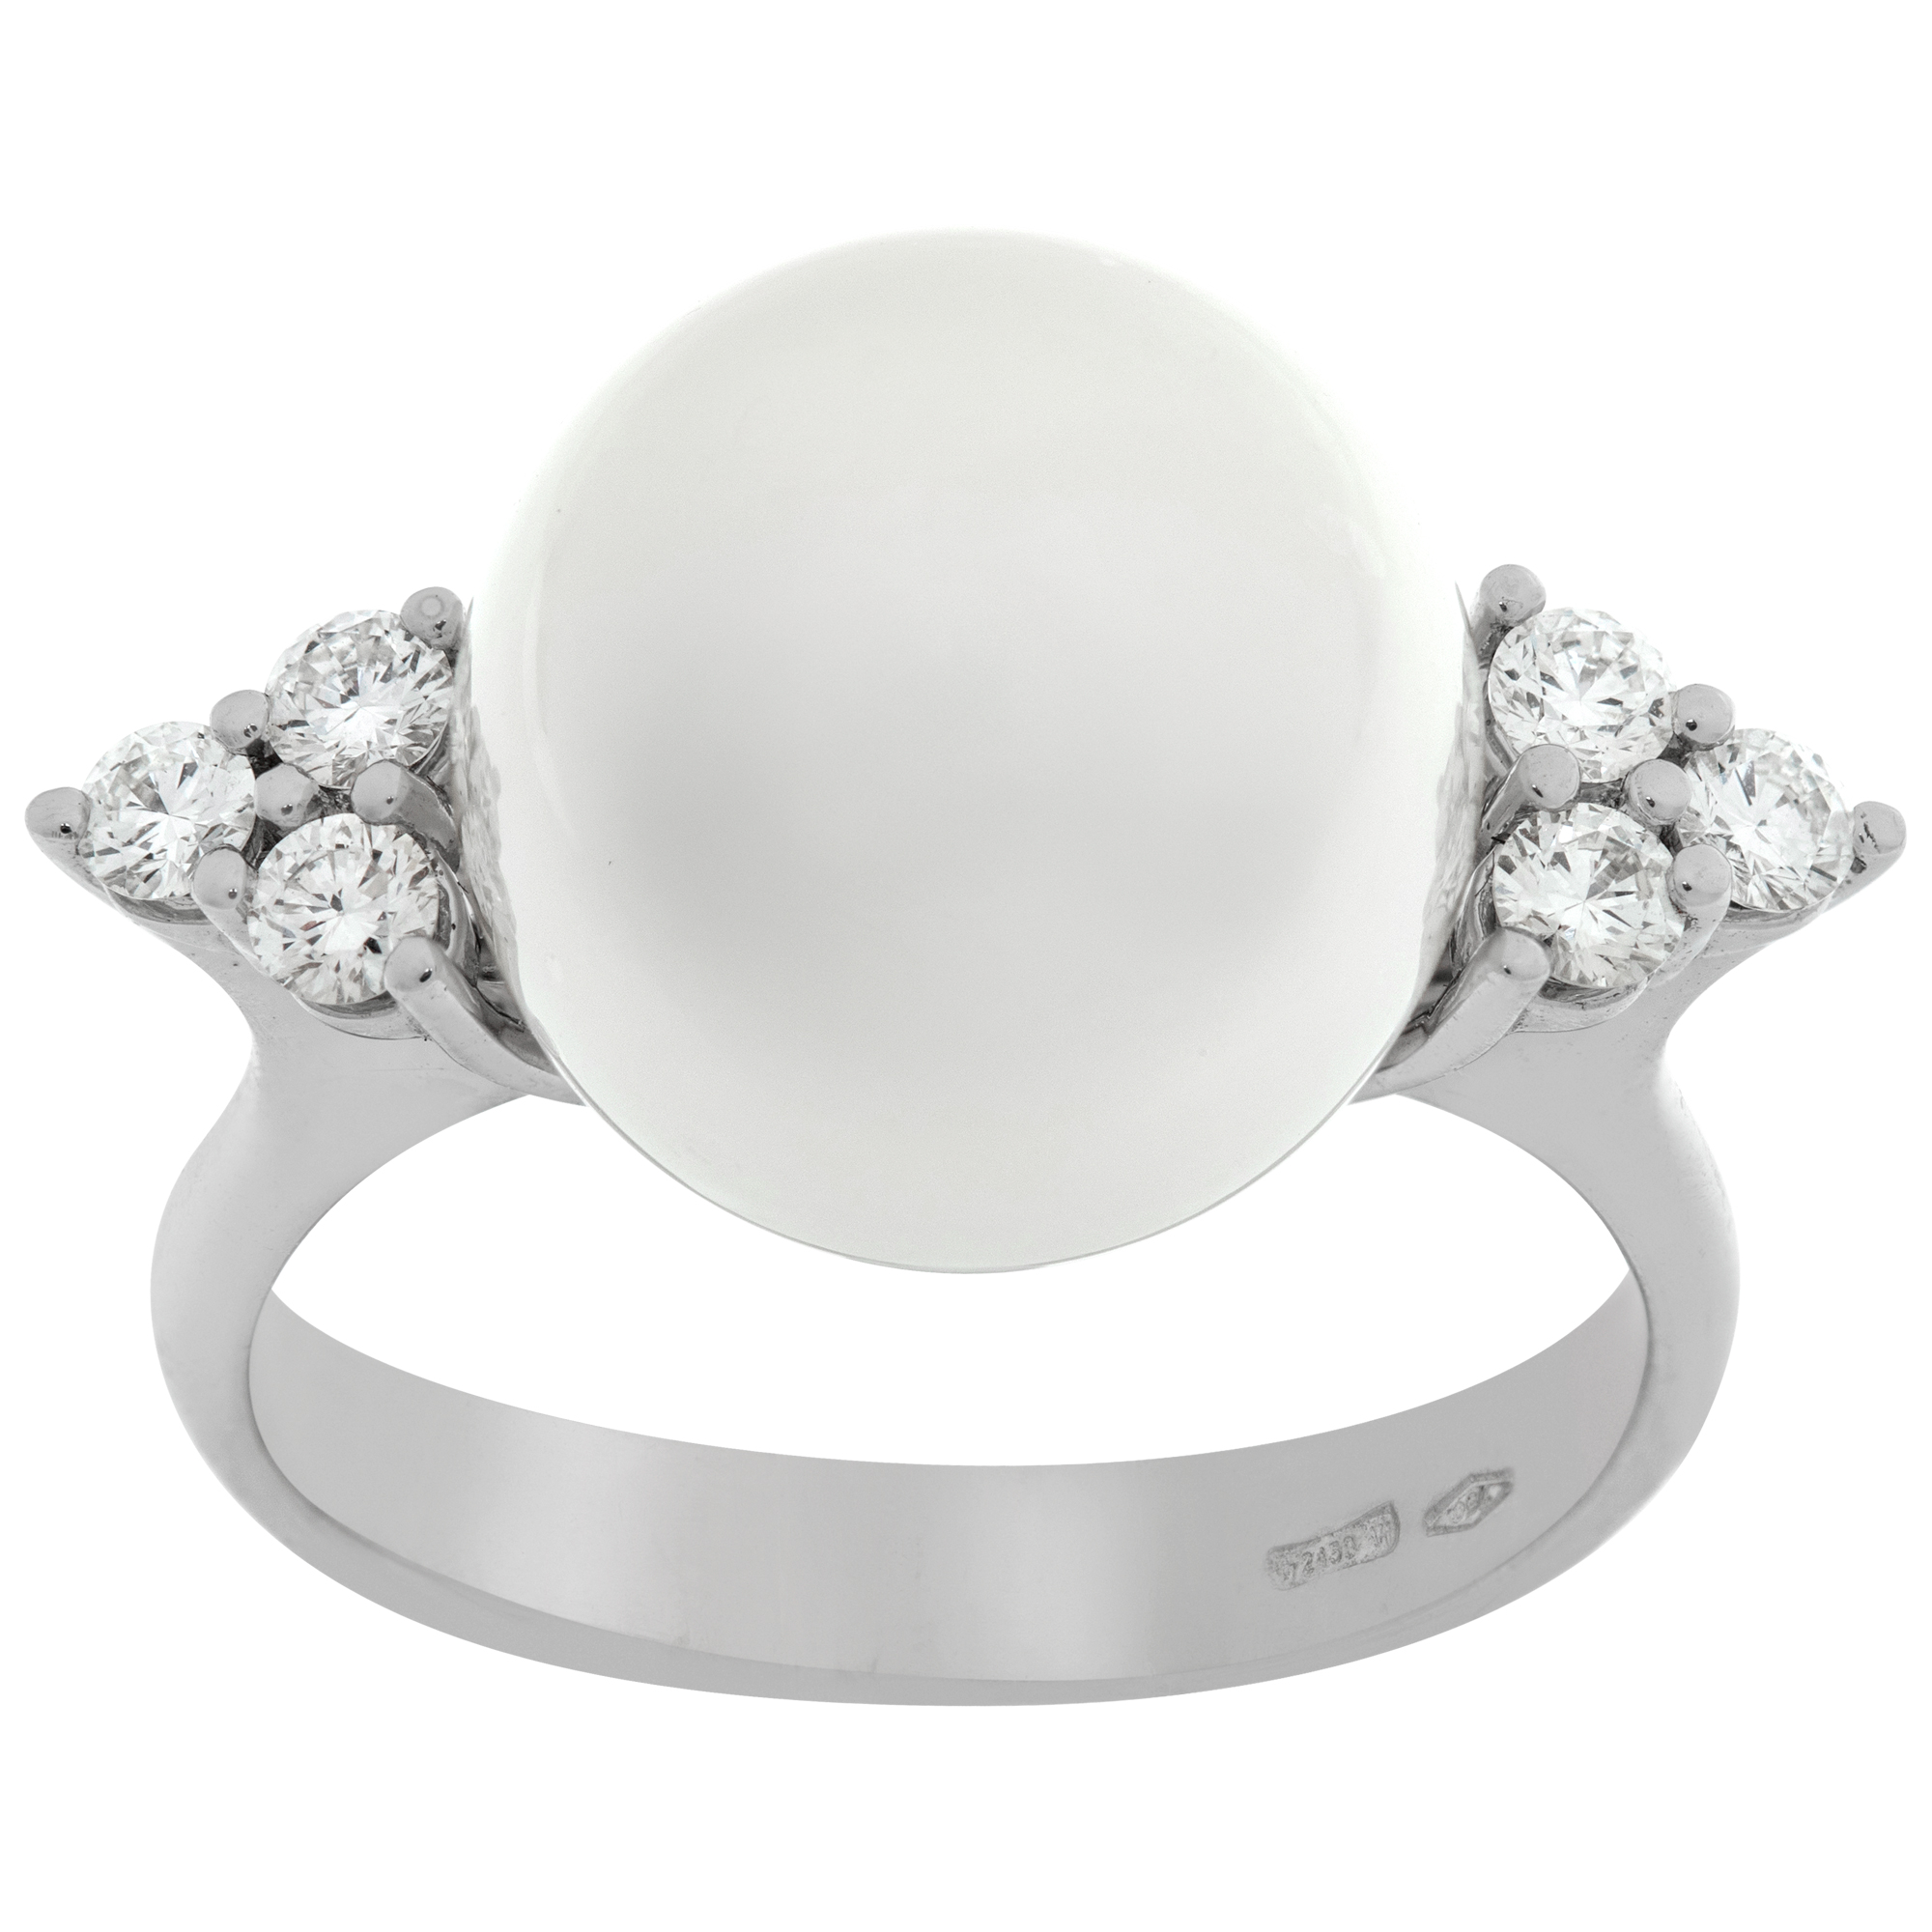 South sea pearl (11.5 x12mm) & diamonds ring, set in 18k white gold. Size 6.75 image 1